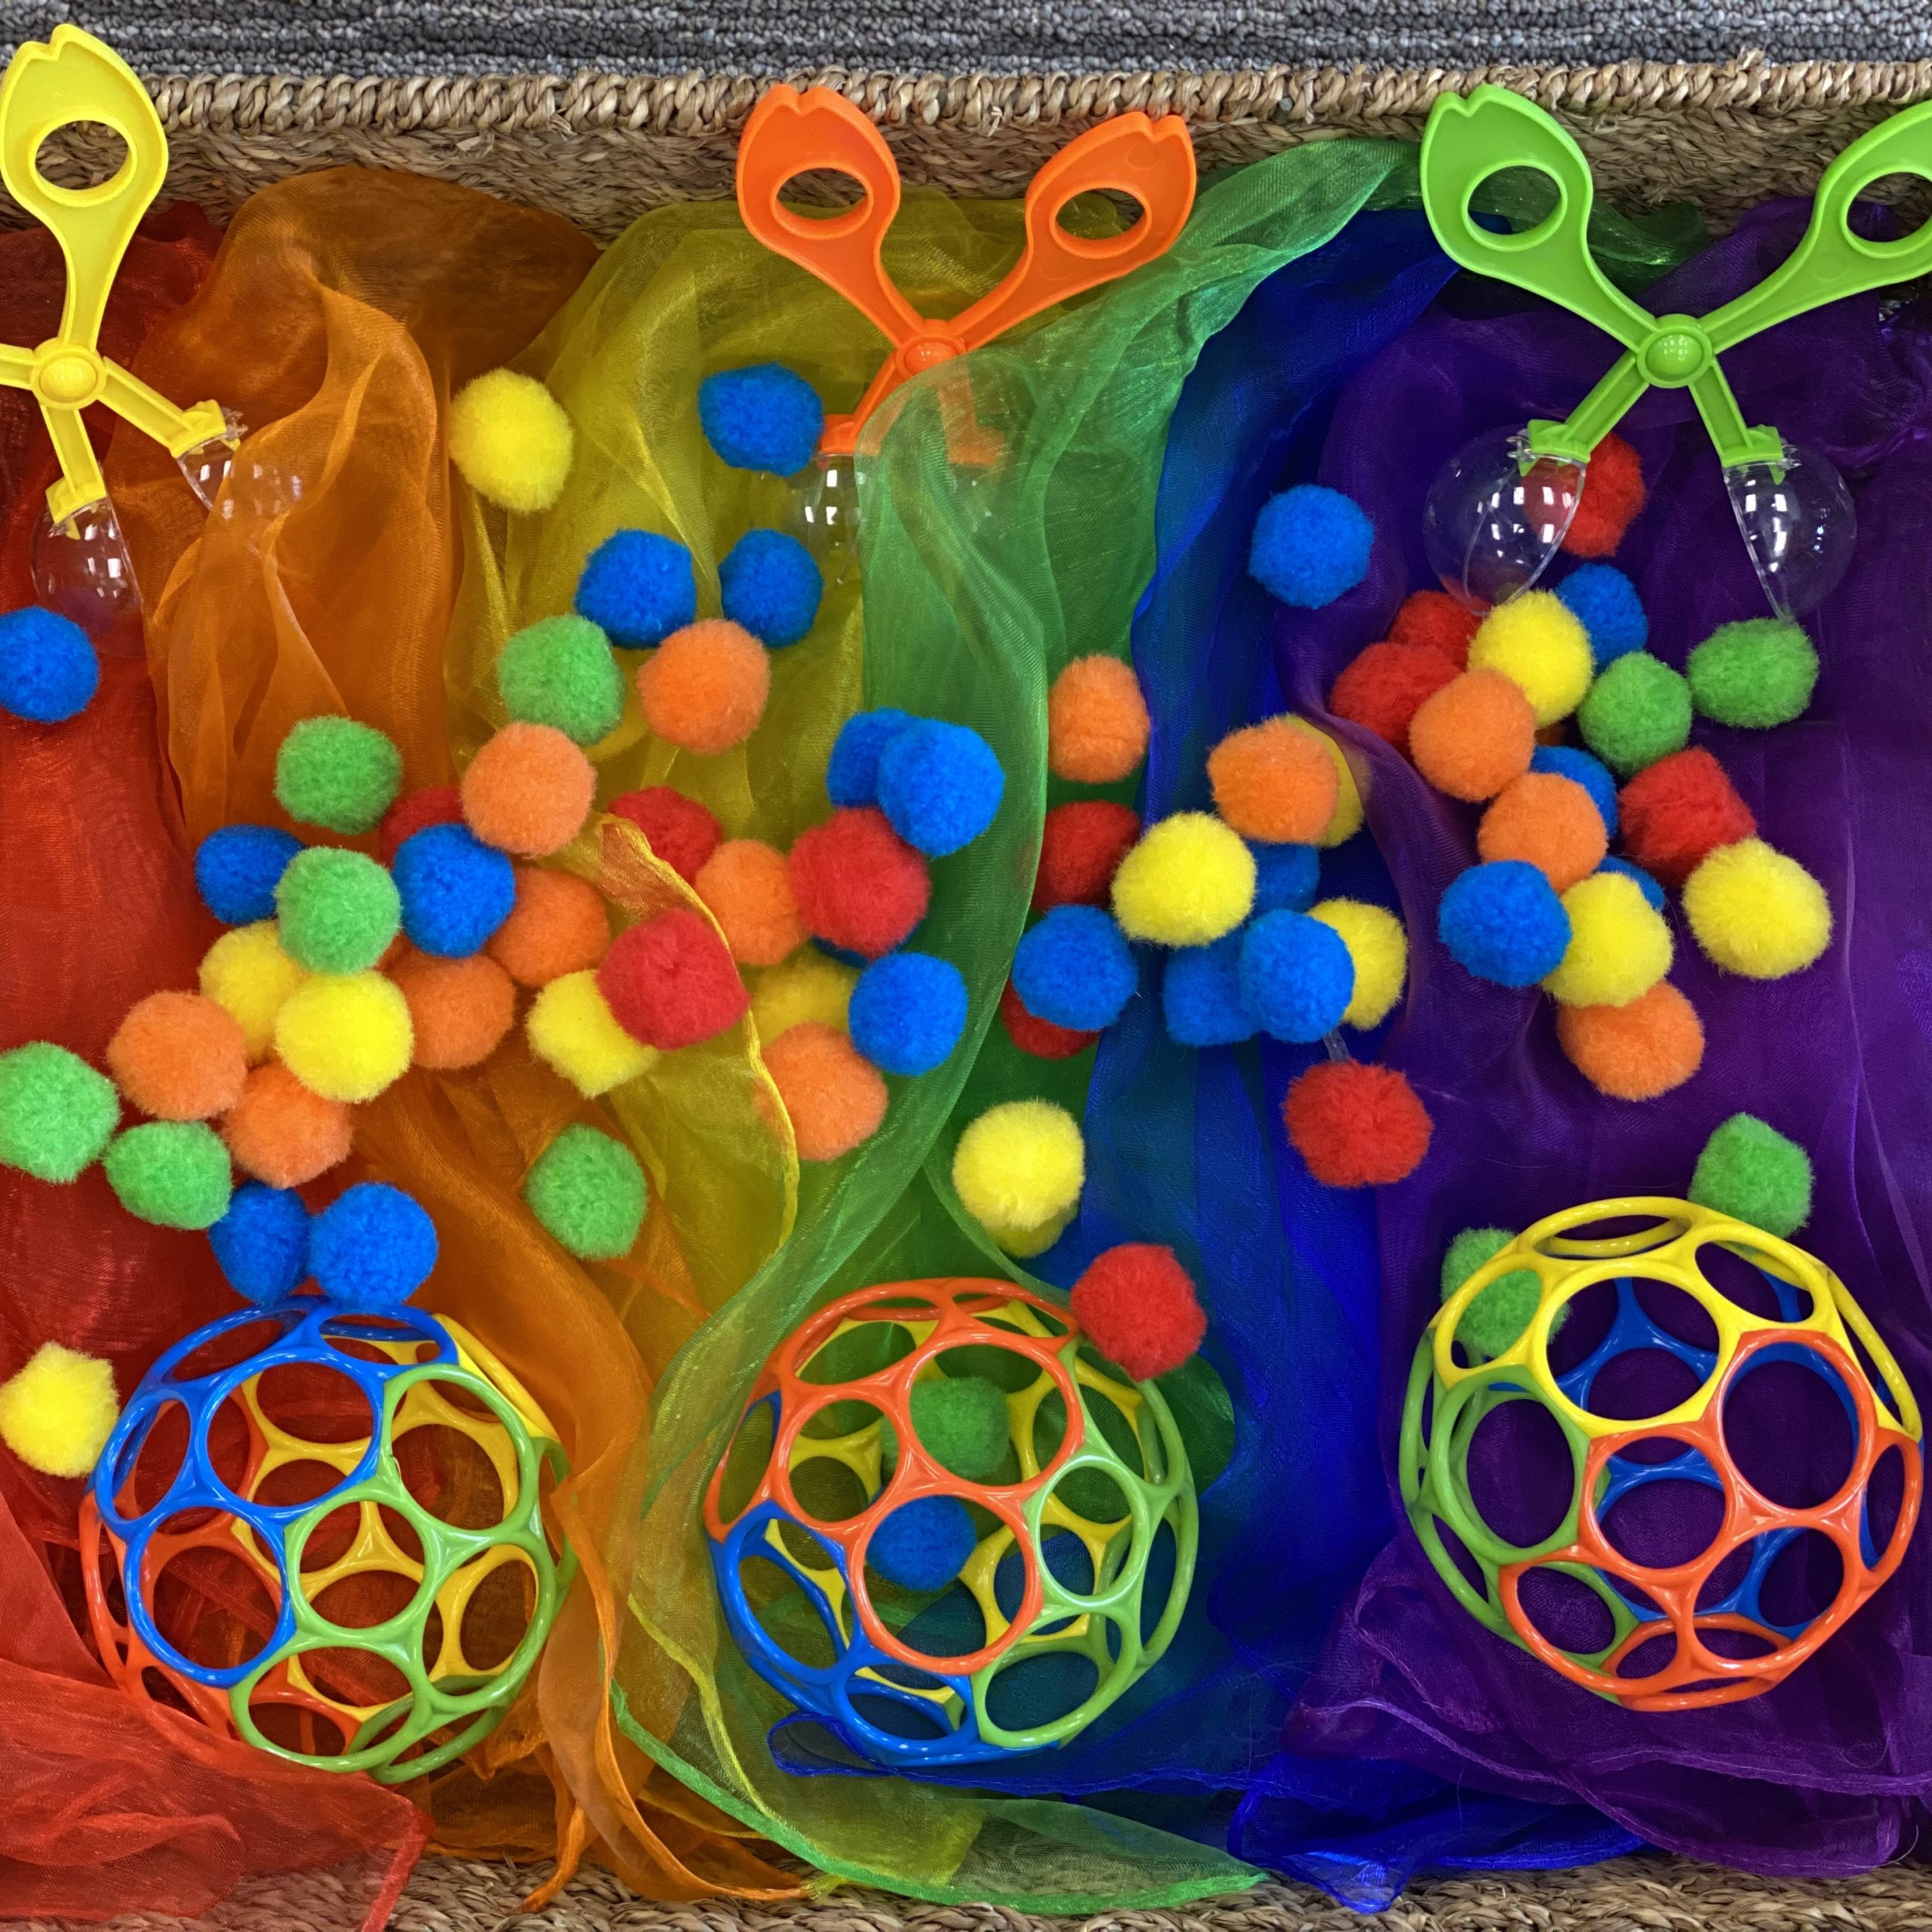 Infants & Toddlers Explore Colours Through Sensory Play